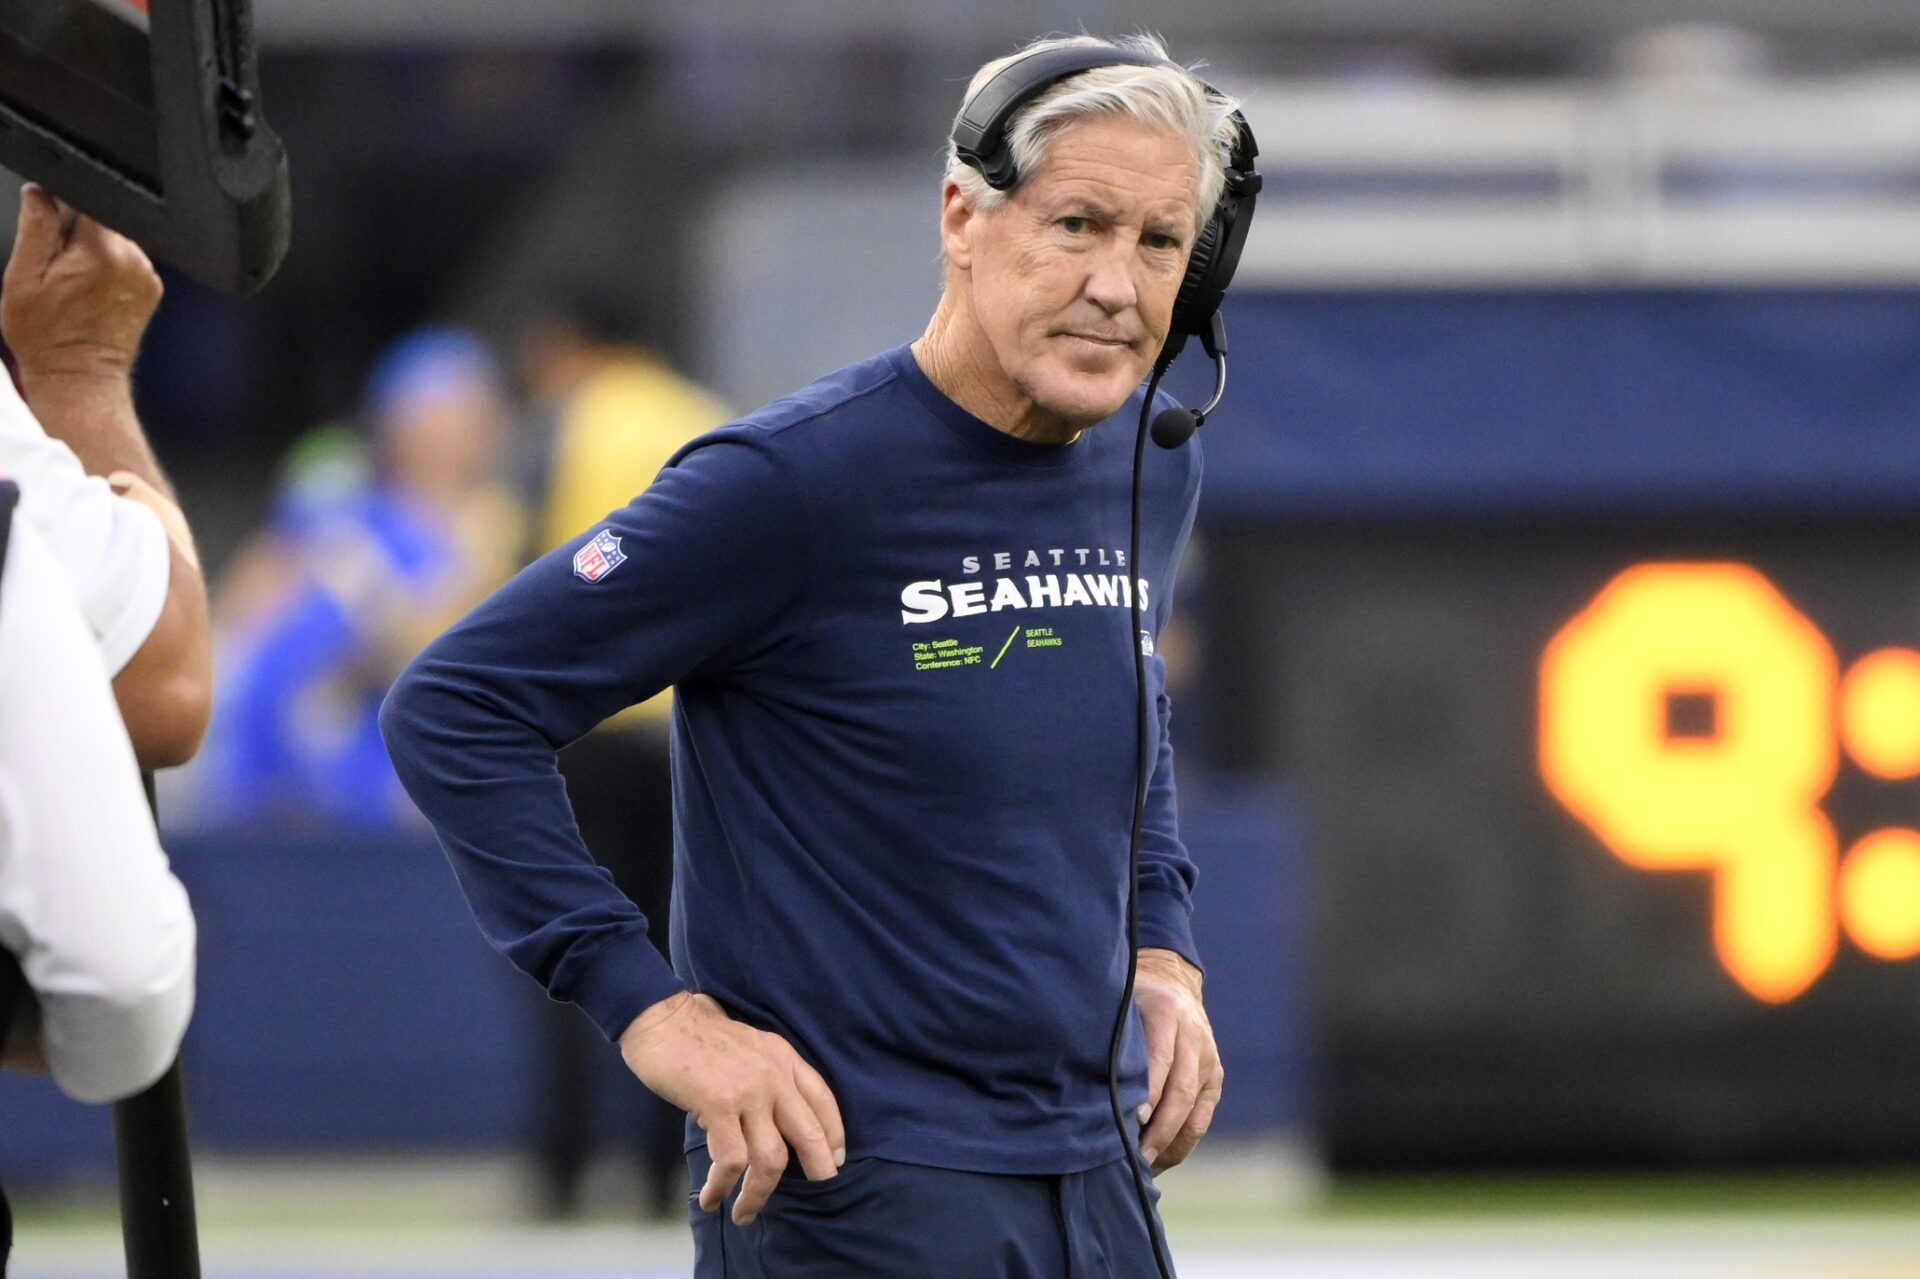 Seattle Seahawks head coach Pete Carroll reacts in the third quarter against the Los Angeles Rams at SoFi Stadium.